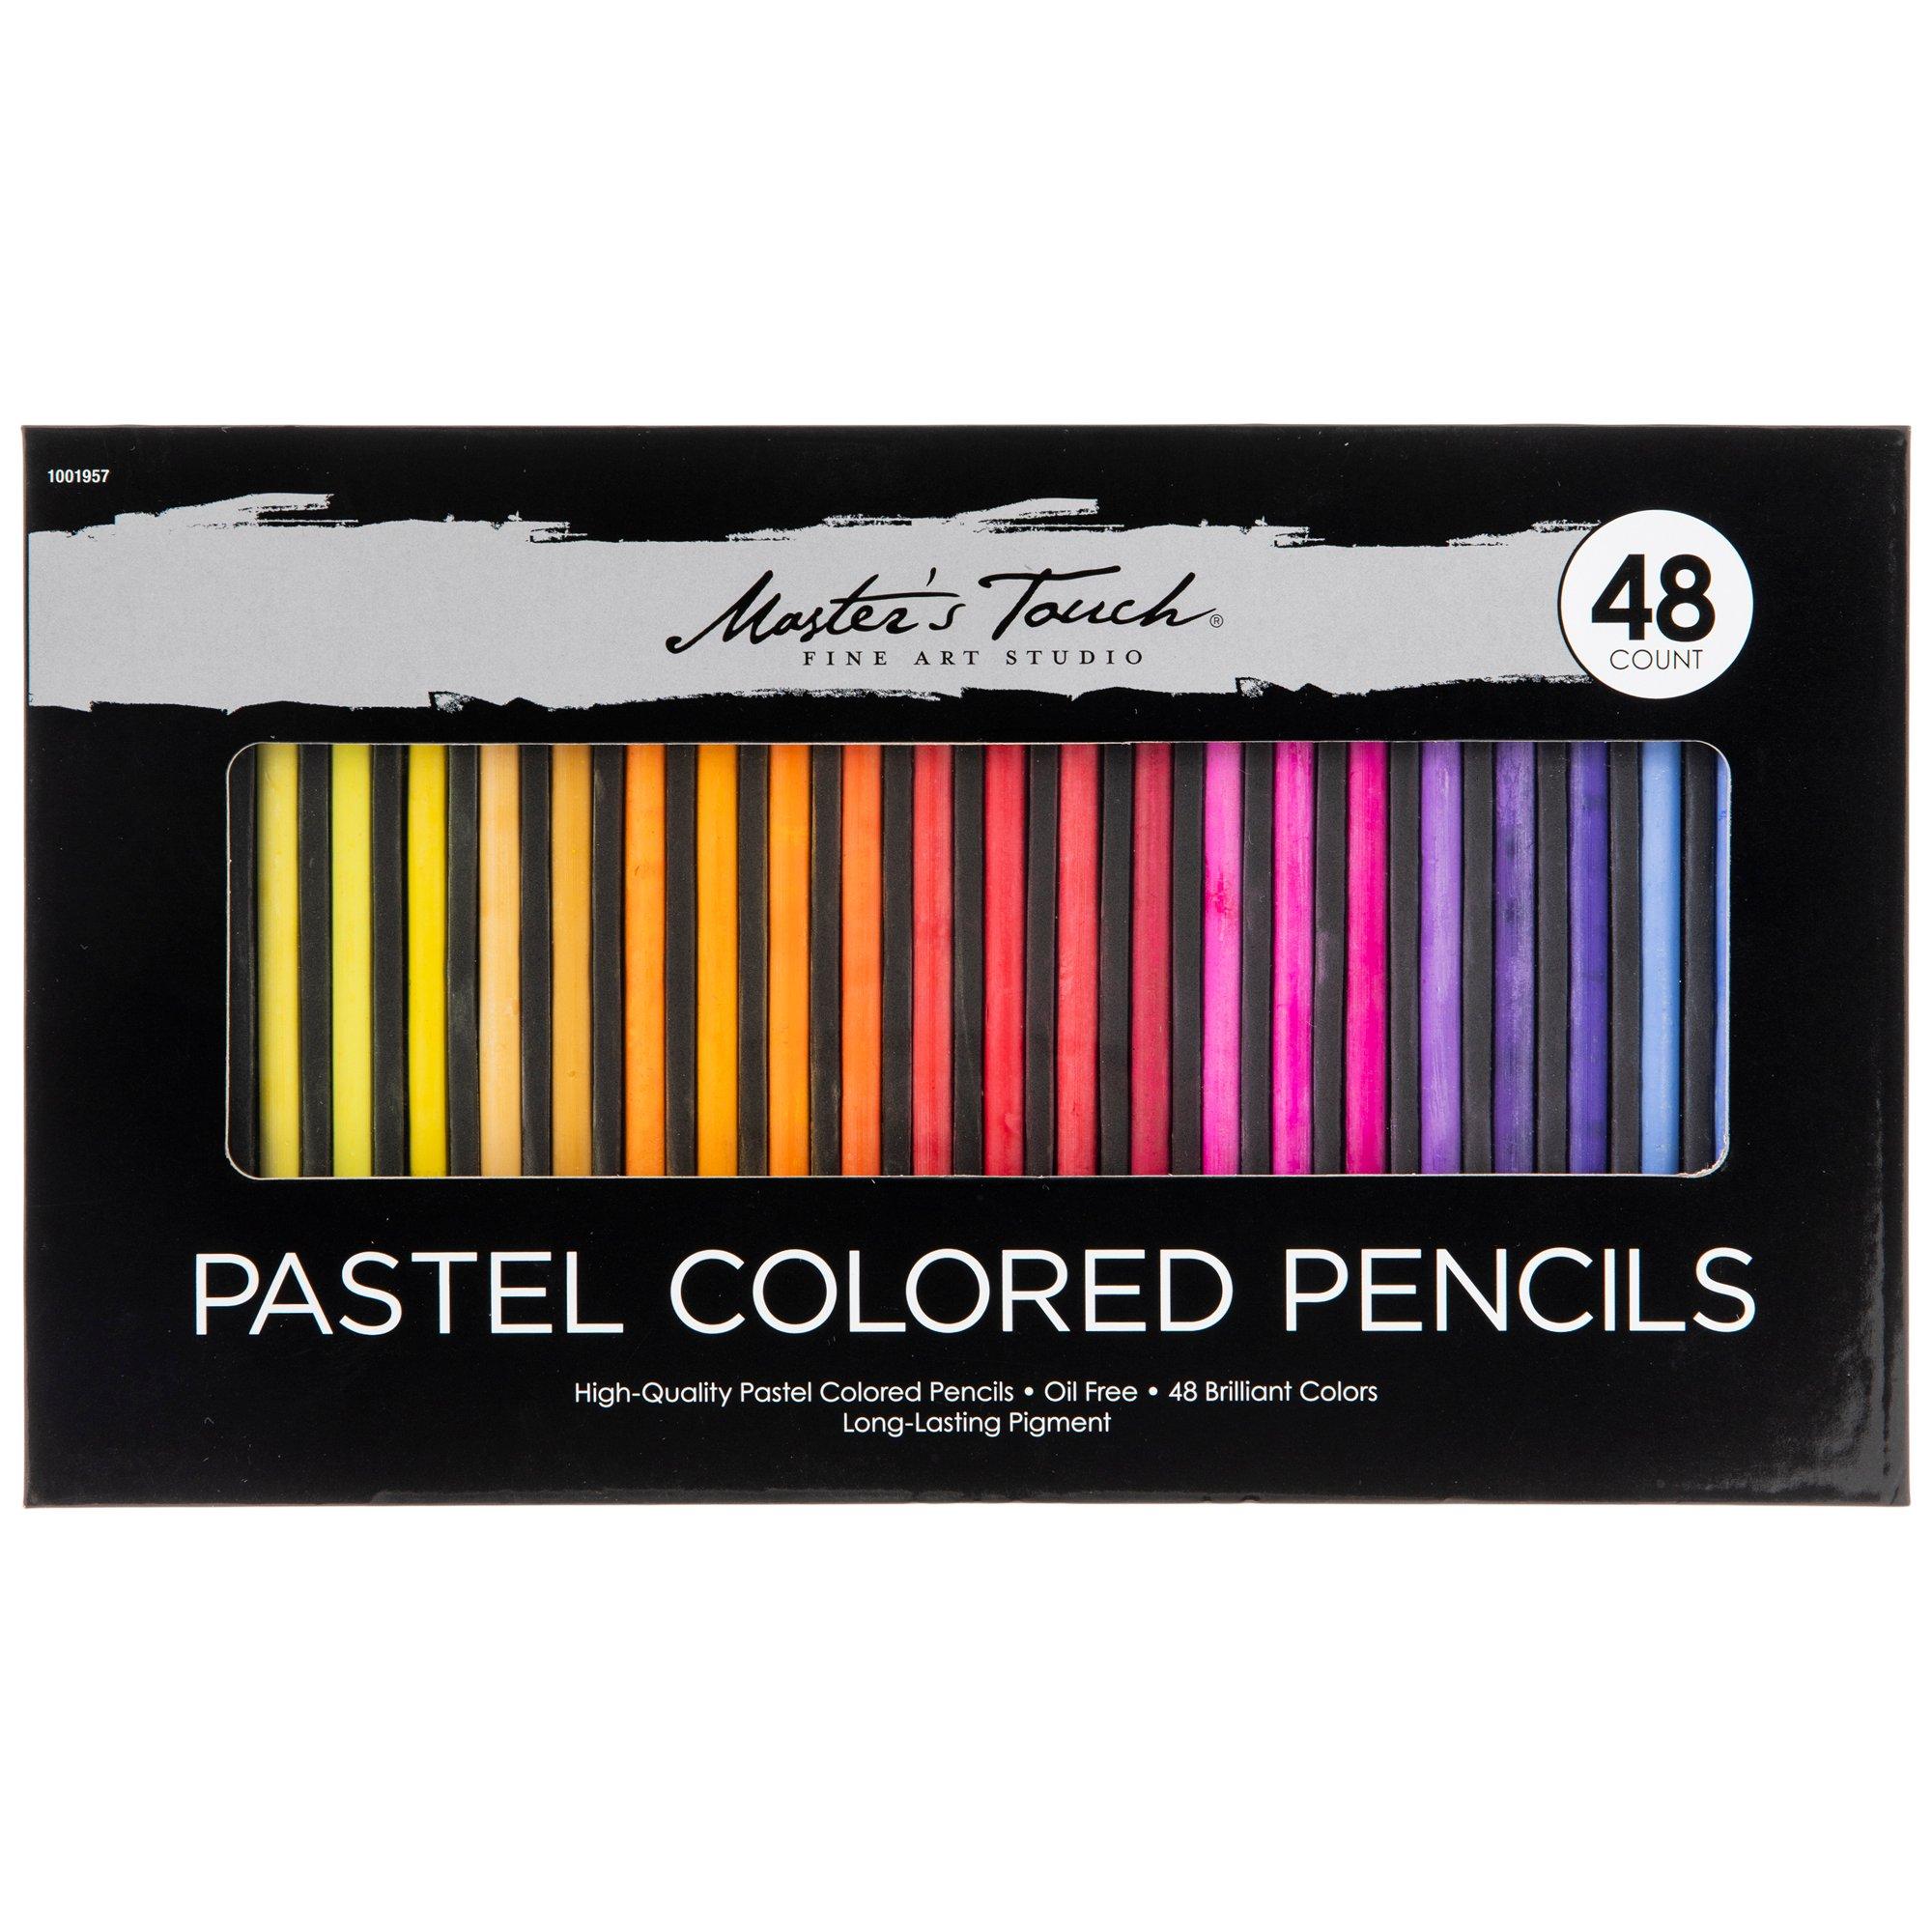 Soft Pastels: Masters Water-Soluble Pastel Painting Sticks (review)